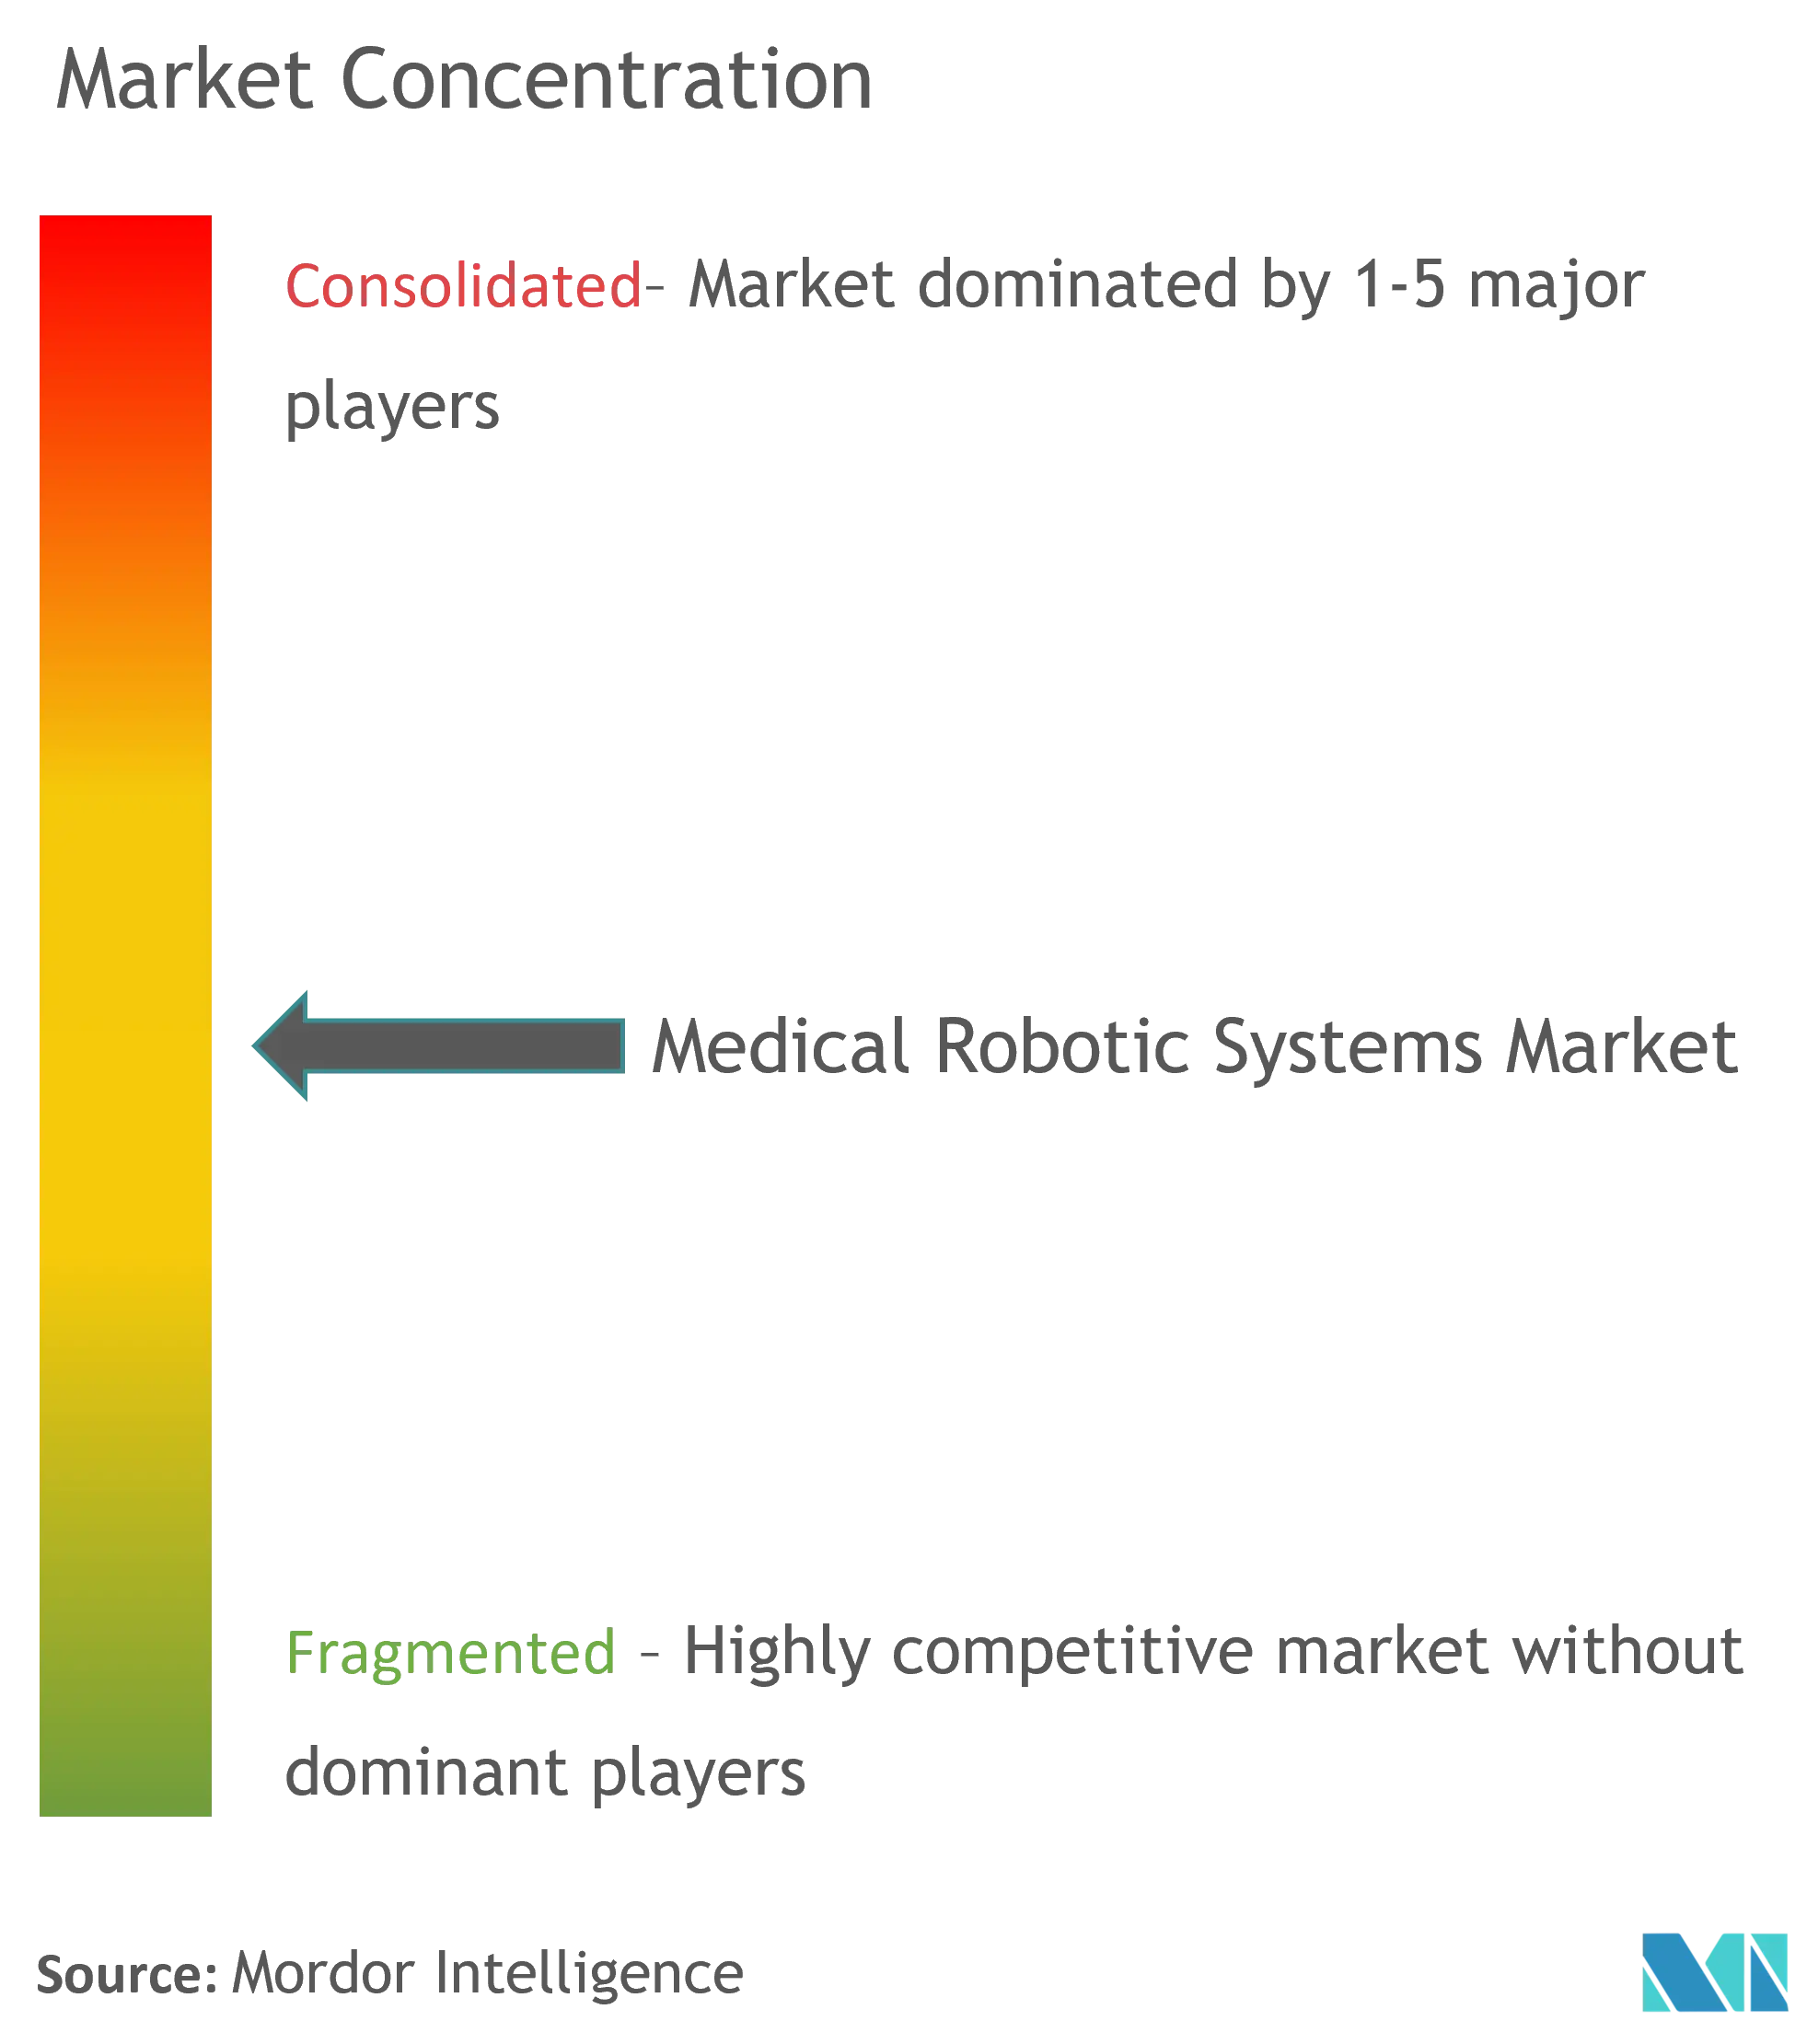 Medical Robotic Systems Market Concentration